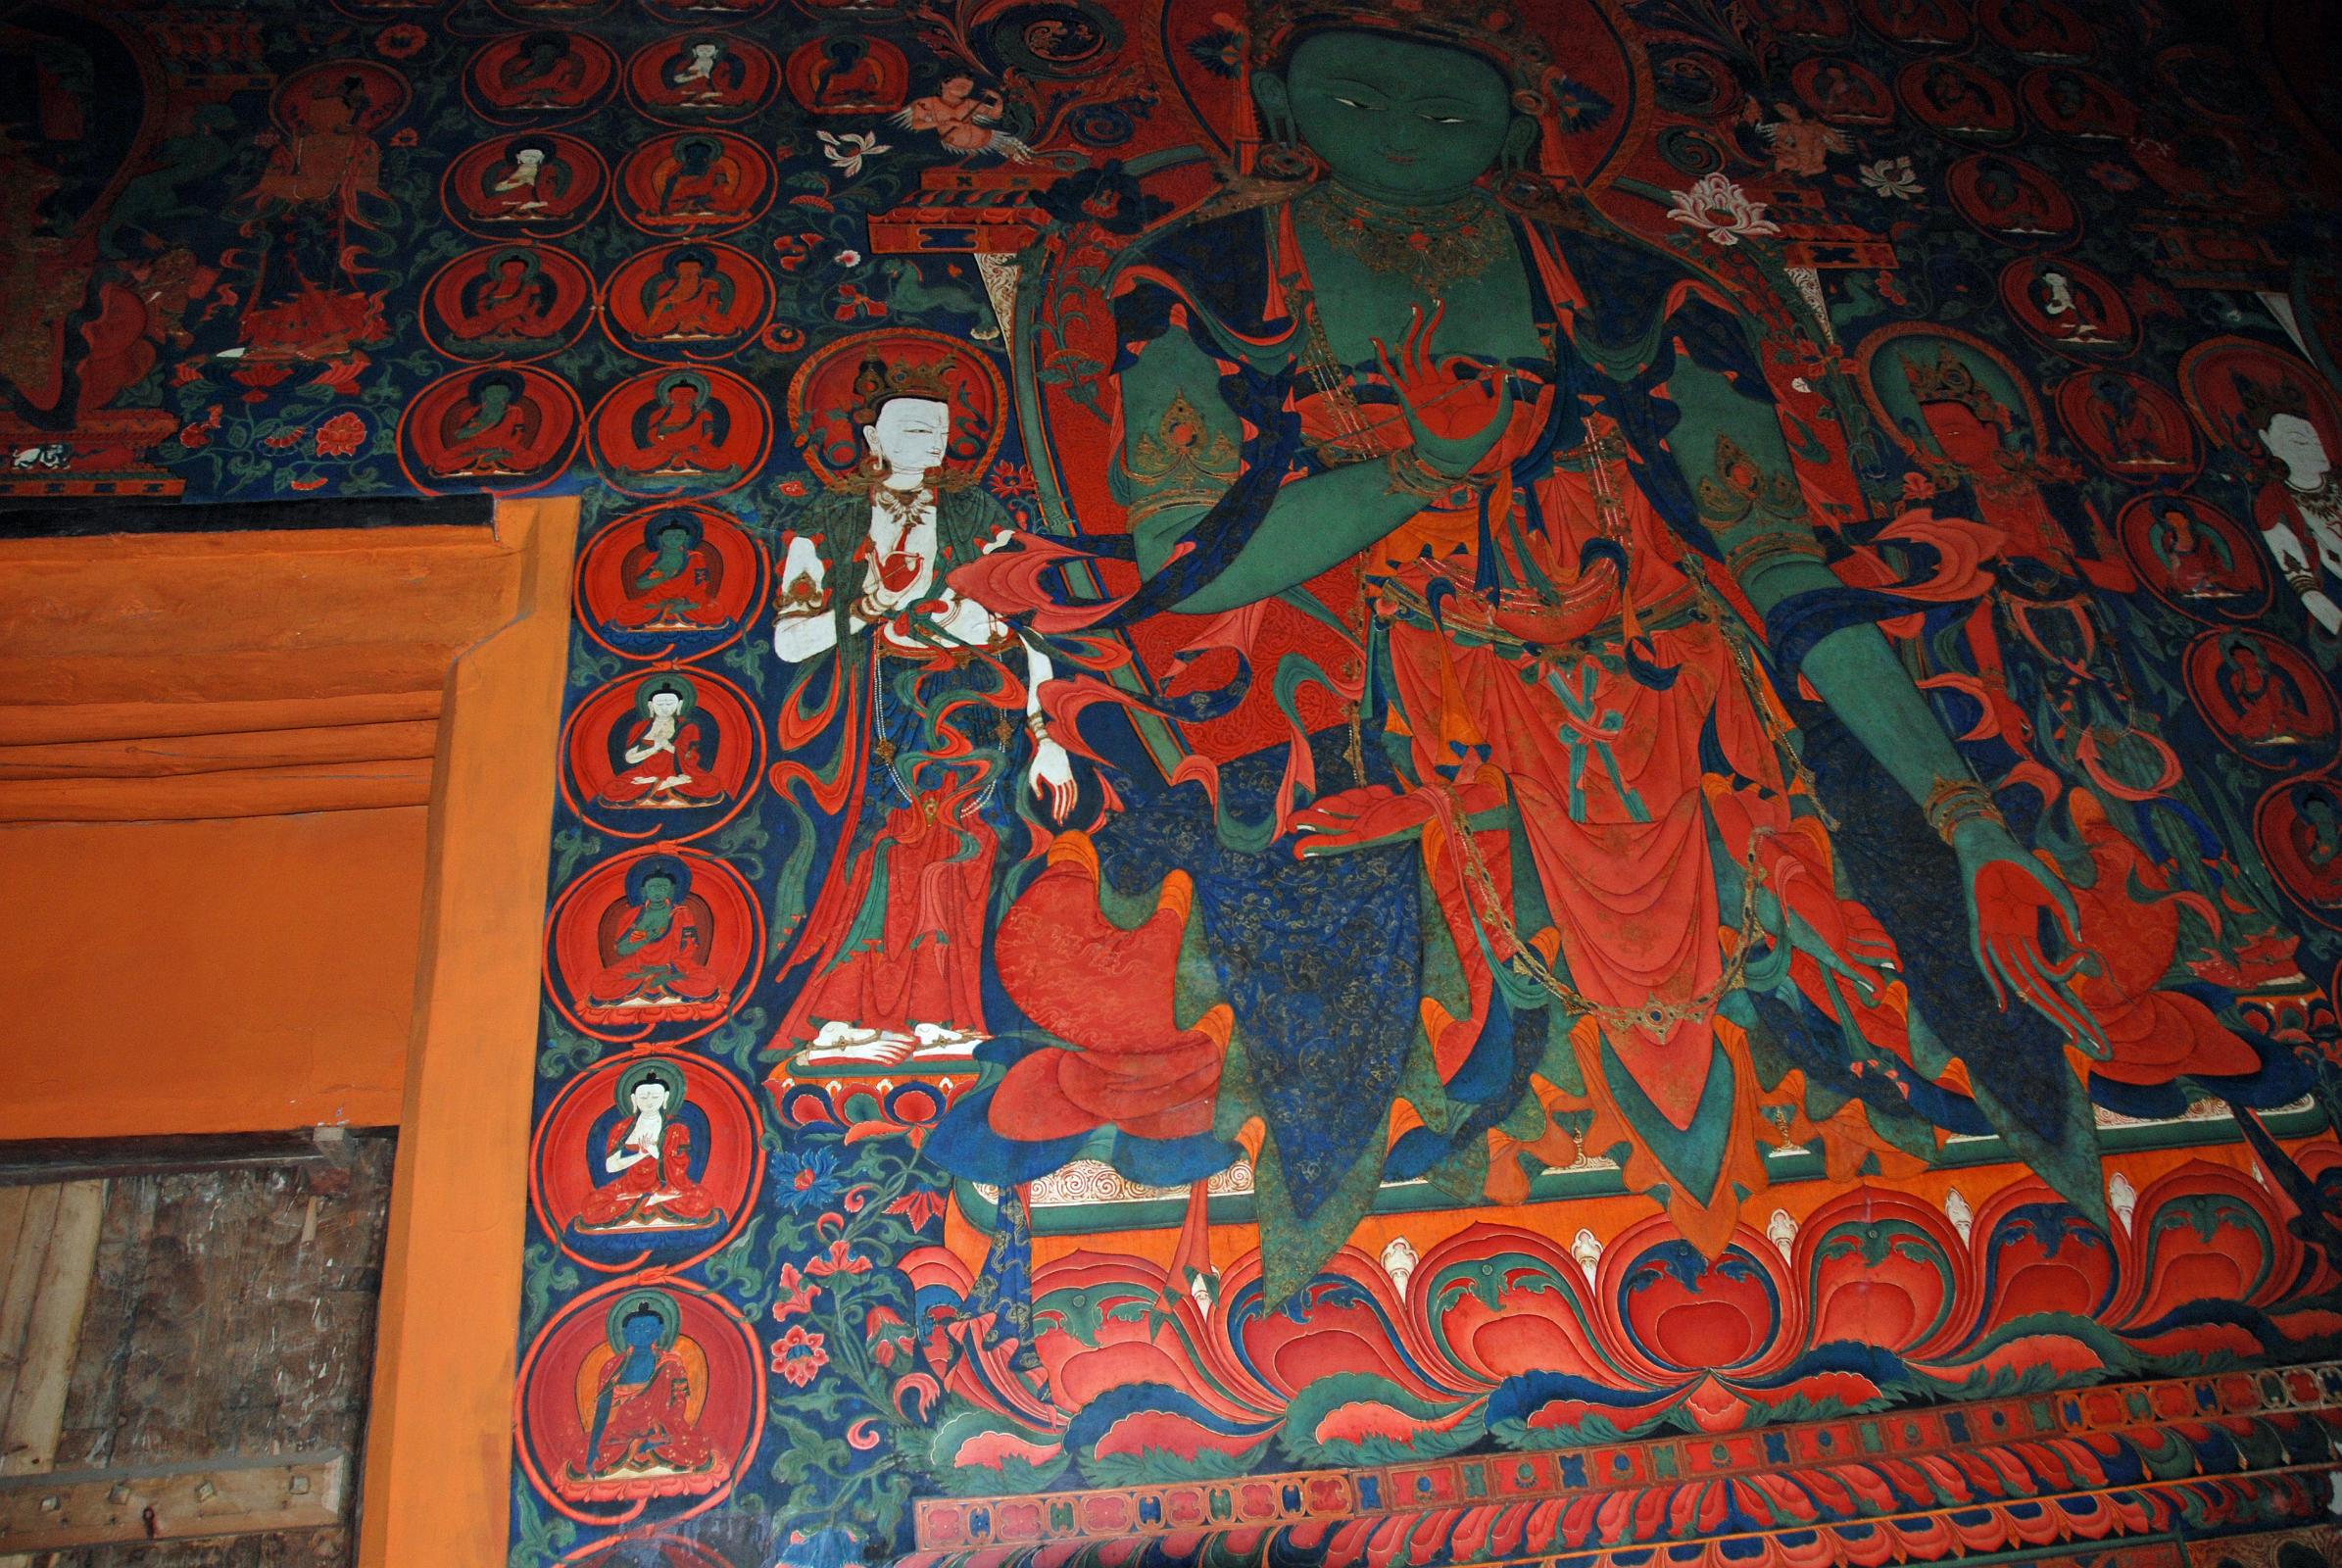 Mustang Lo Manthang Thubchen 06-1 Main Assembly Hall Painting Of Amoghasiddhi To Right Of Door